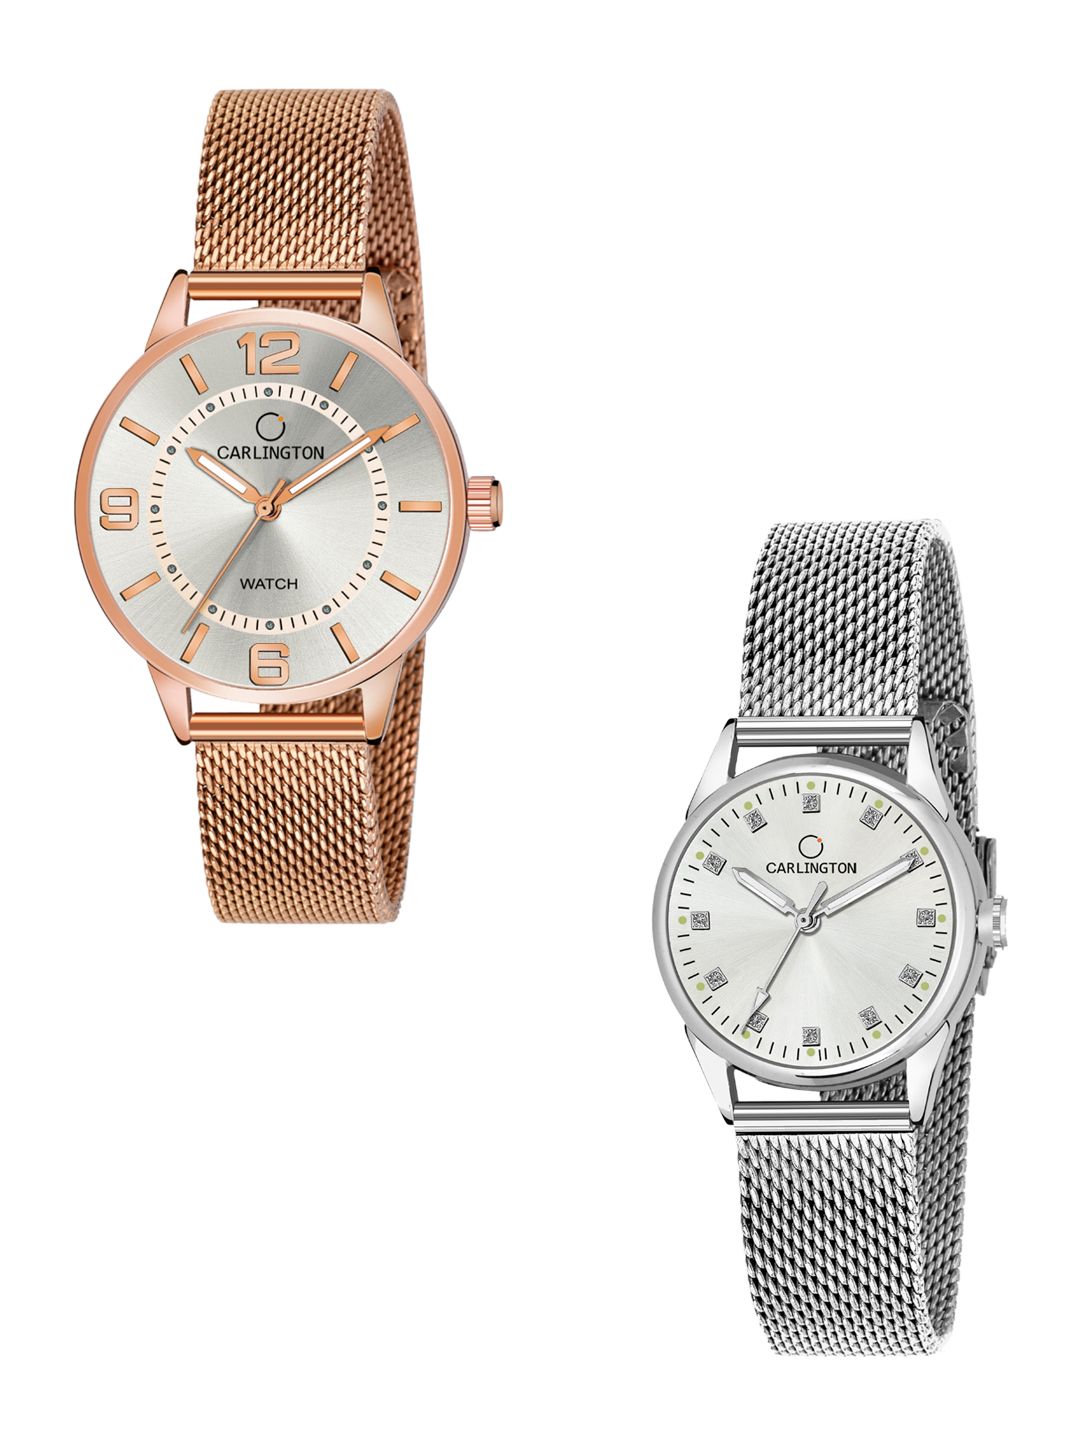 CARLINGTON Women Set Of 2 Analogue Watch CT2002 RoseWhite-CT2003 Silver Price in India